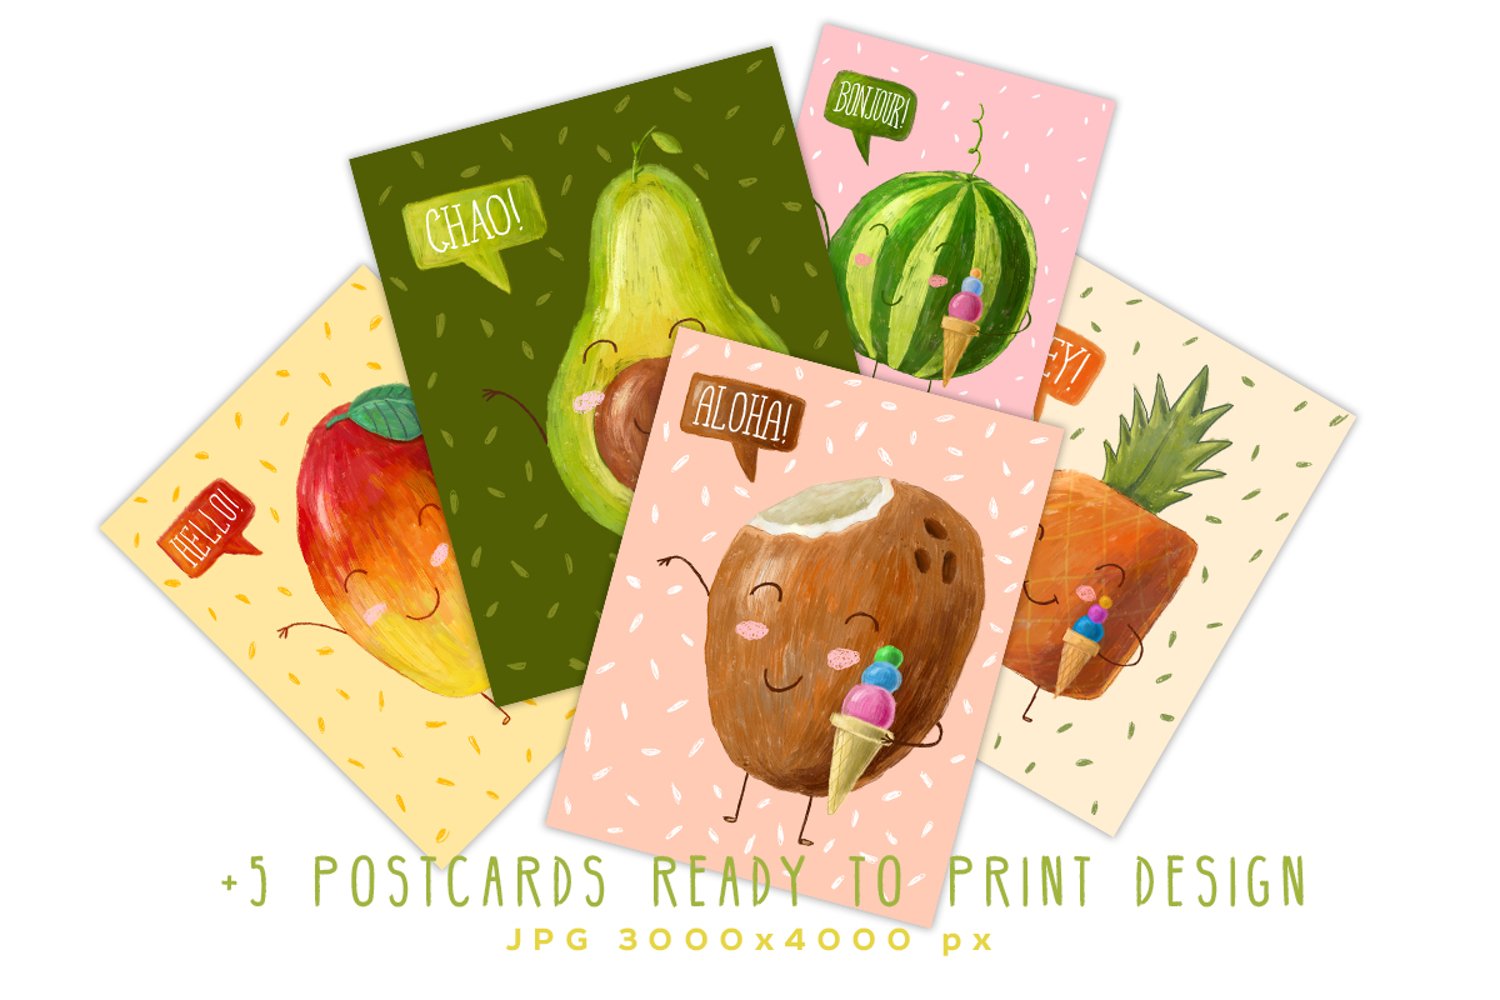 This set contains 5 postcards which are ready to print.